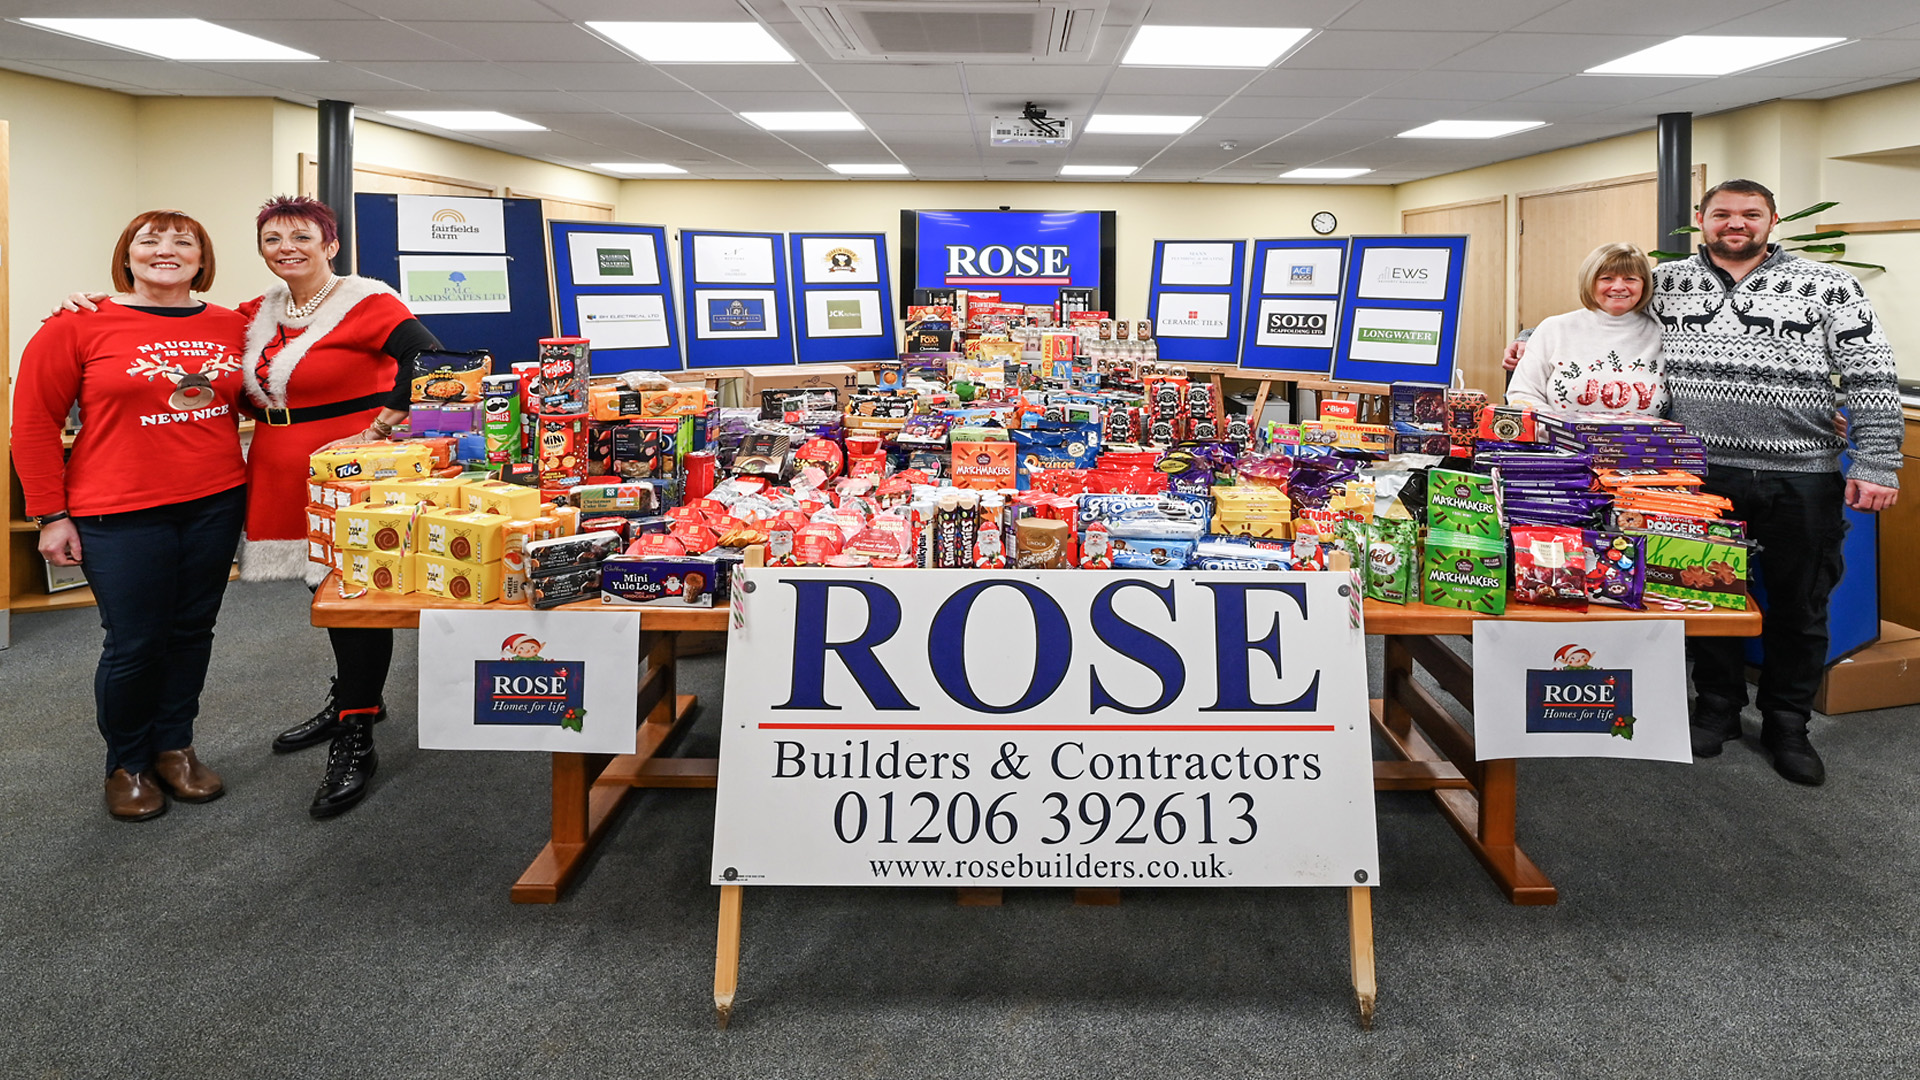 Manningtree and District Food Bank